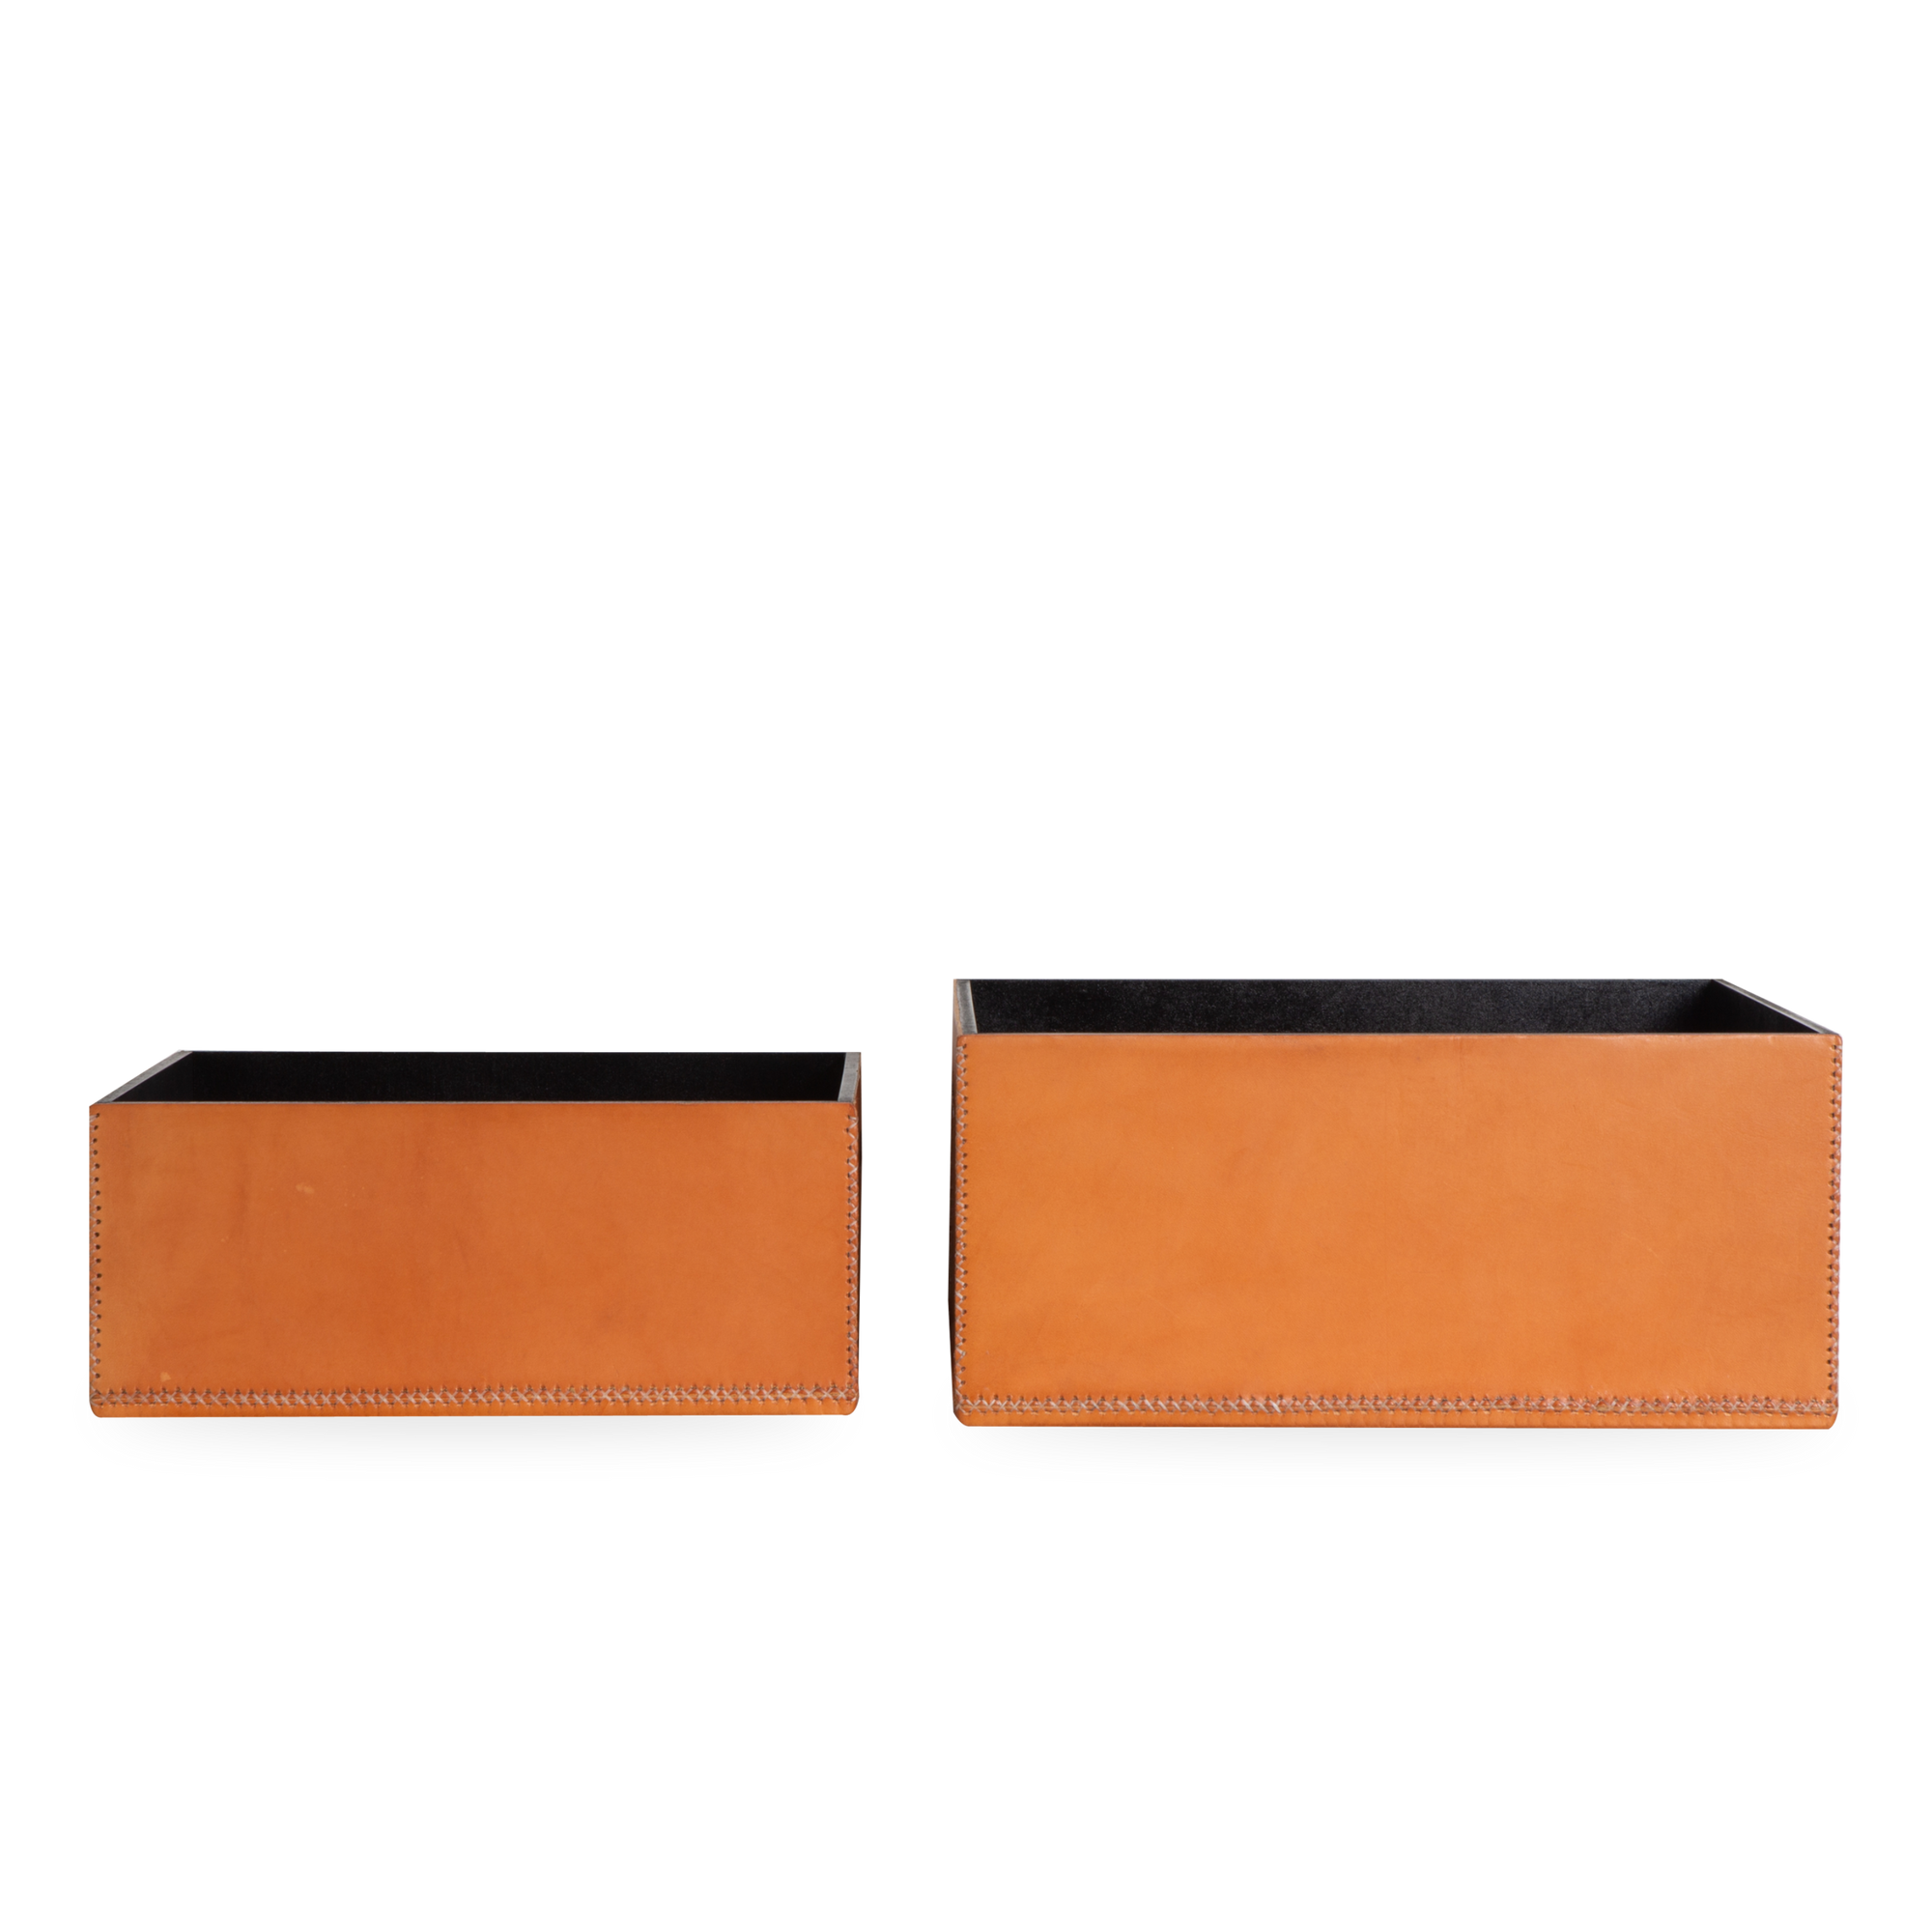 Channeling a connection to local natural materials to form a line of sustainable goods, the Solid Leather Box uses premium cow leather from the Paraguayan Chaco region.